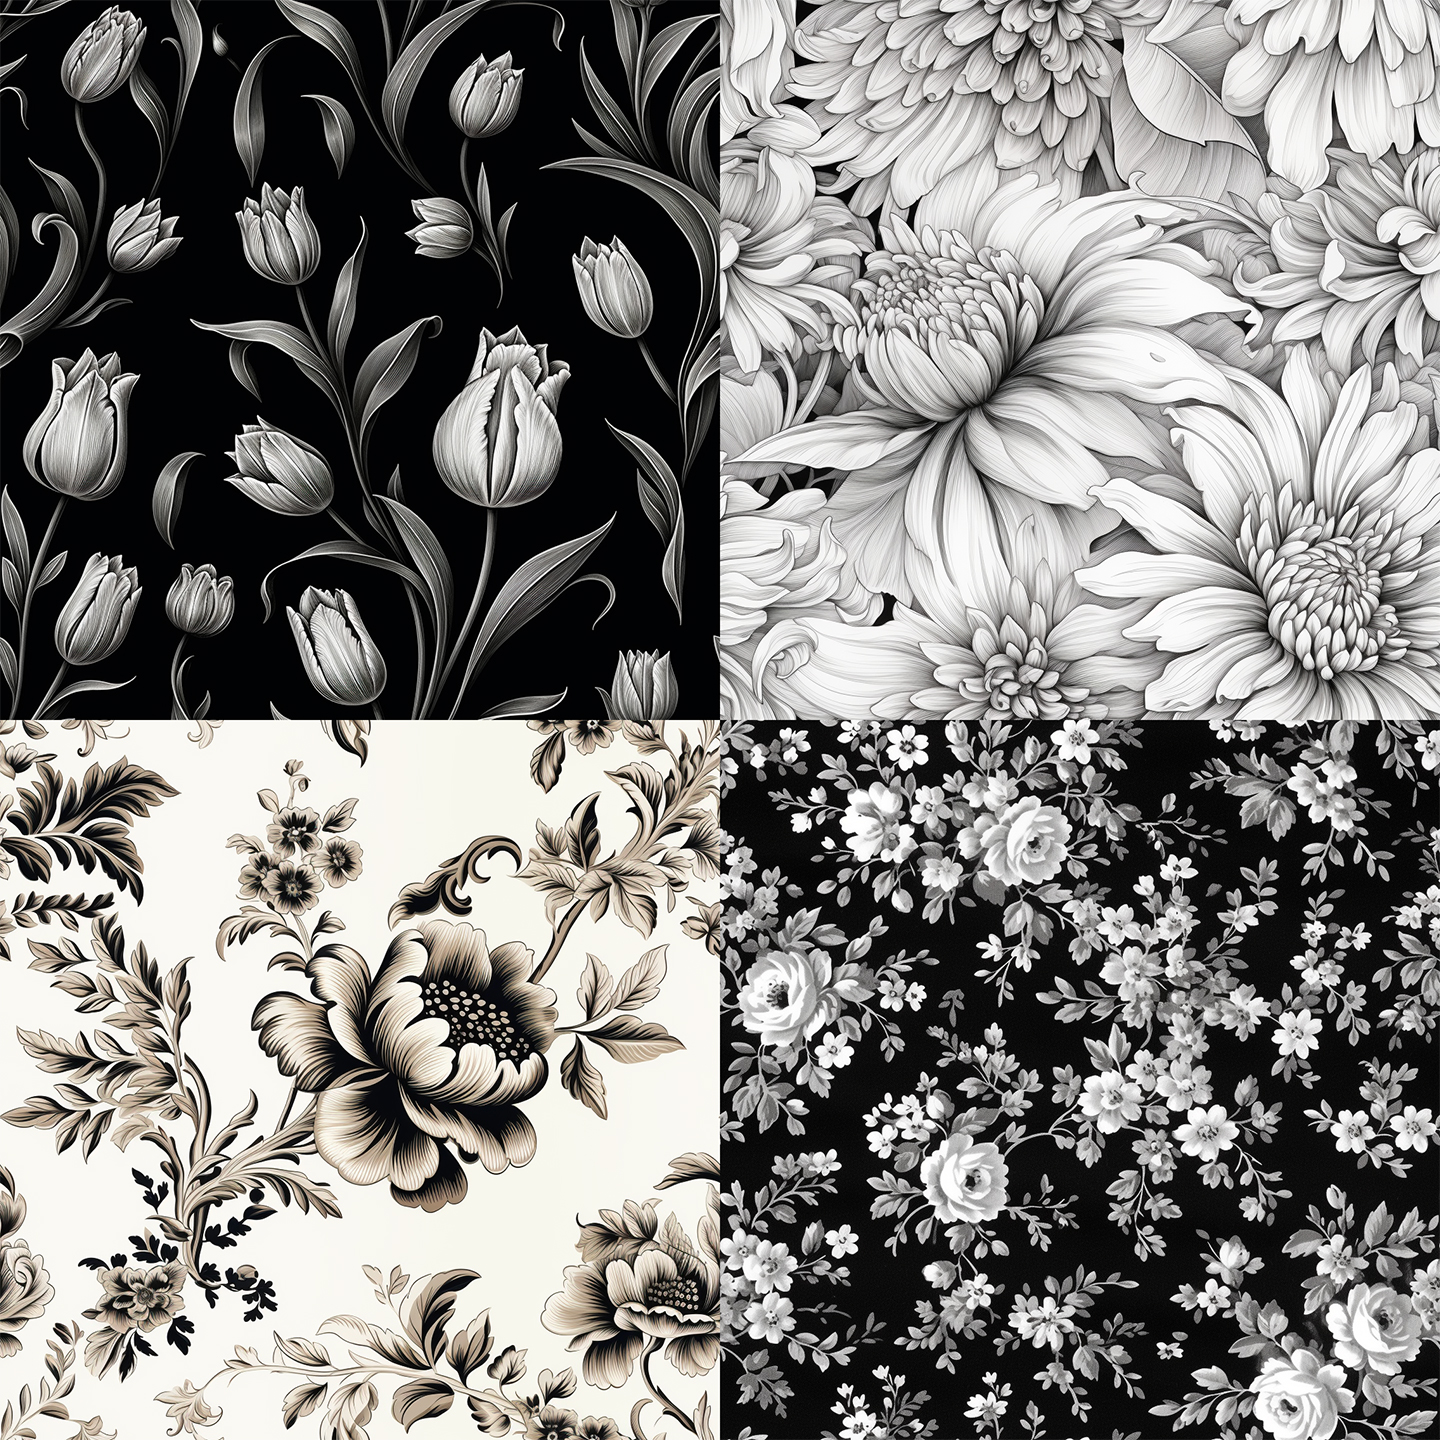 Let's delve into the world of AI. Here is a floral texture created with MidJourney